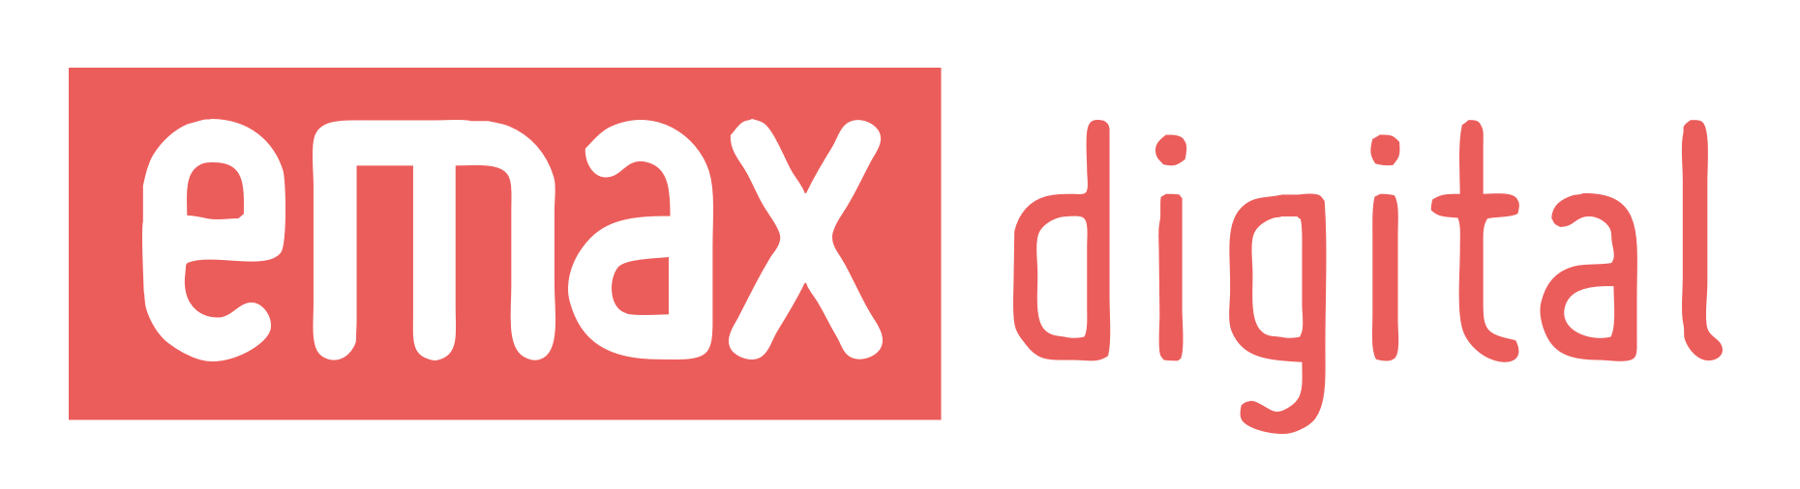 emax digital logo - horizontal - red with white background